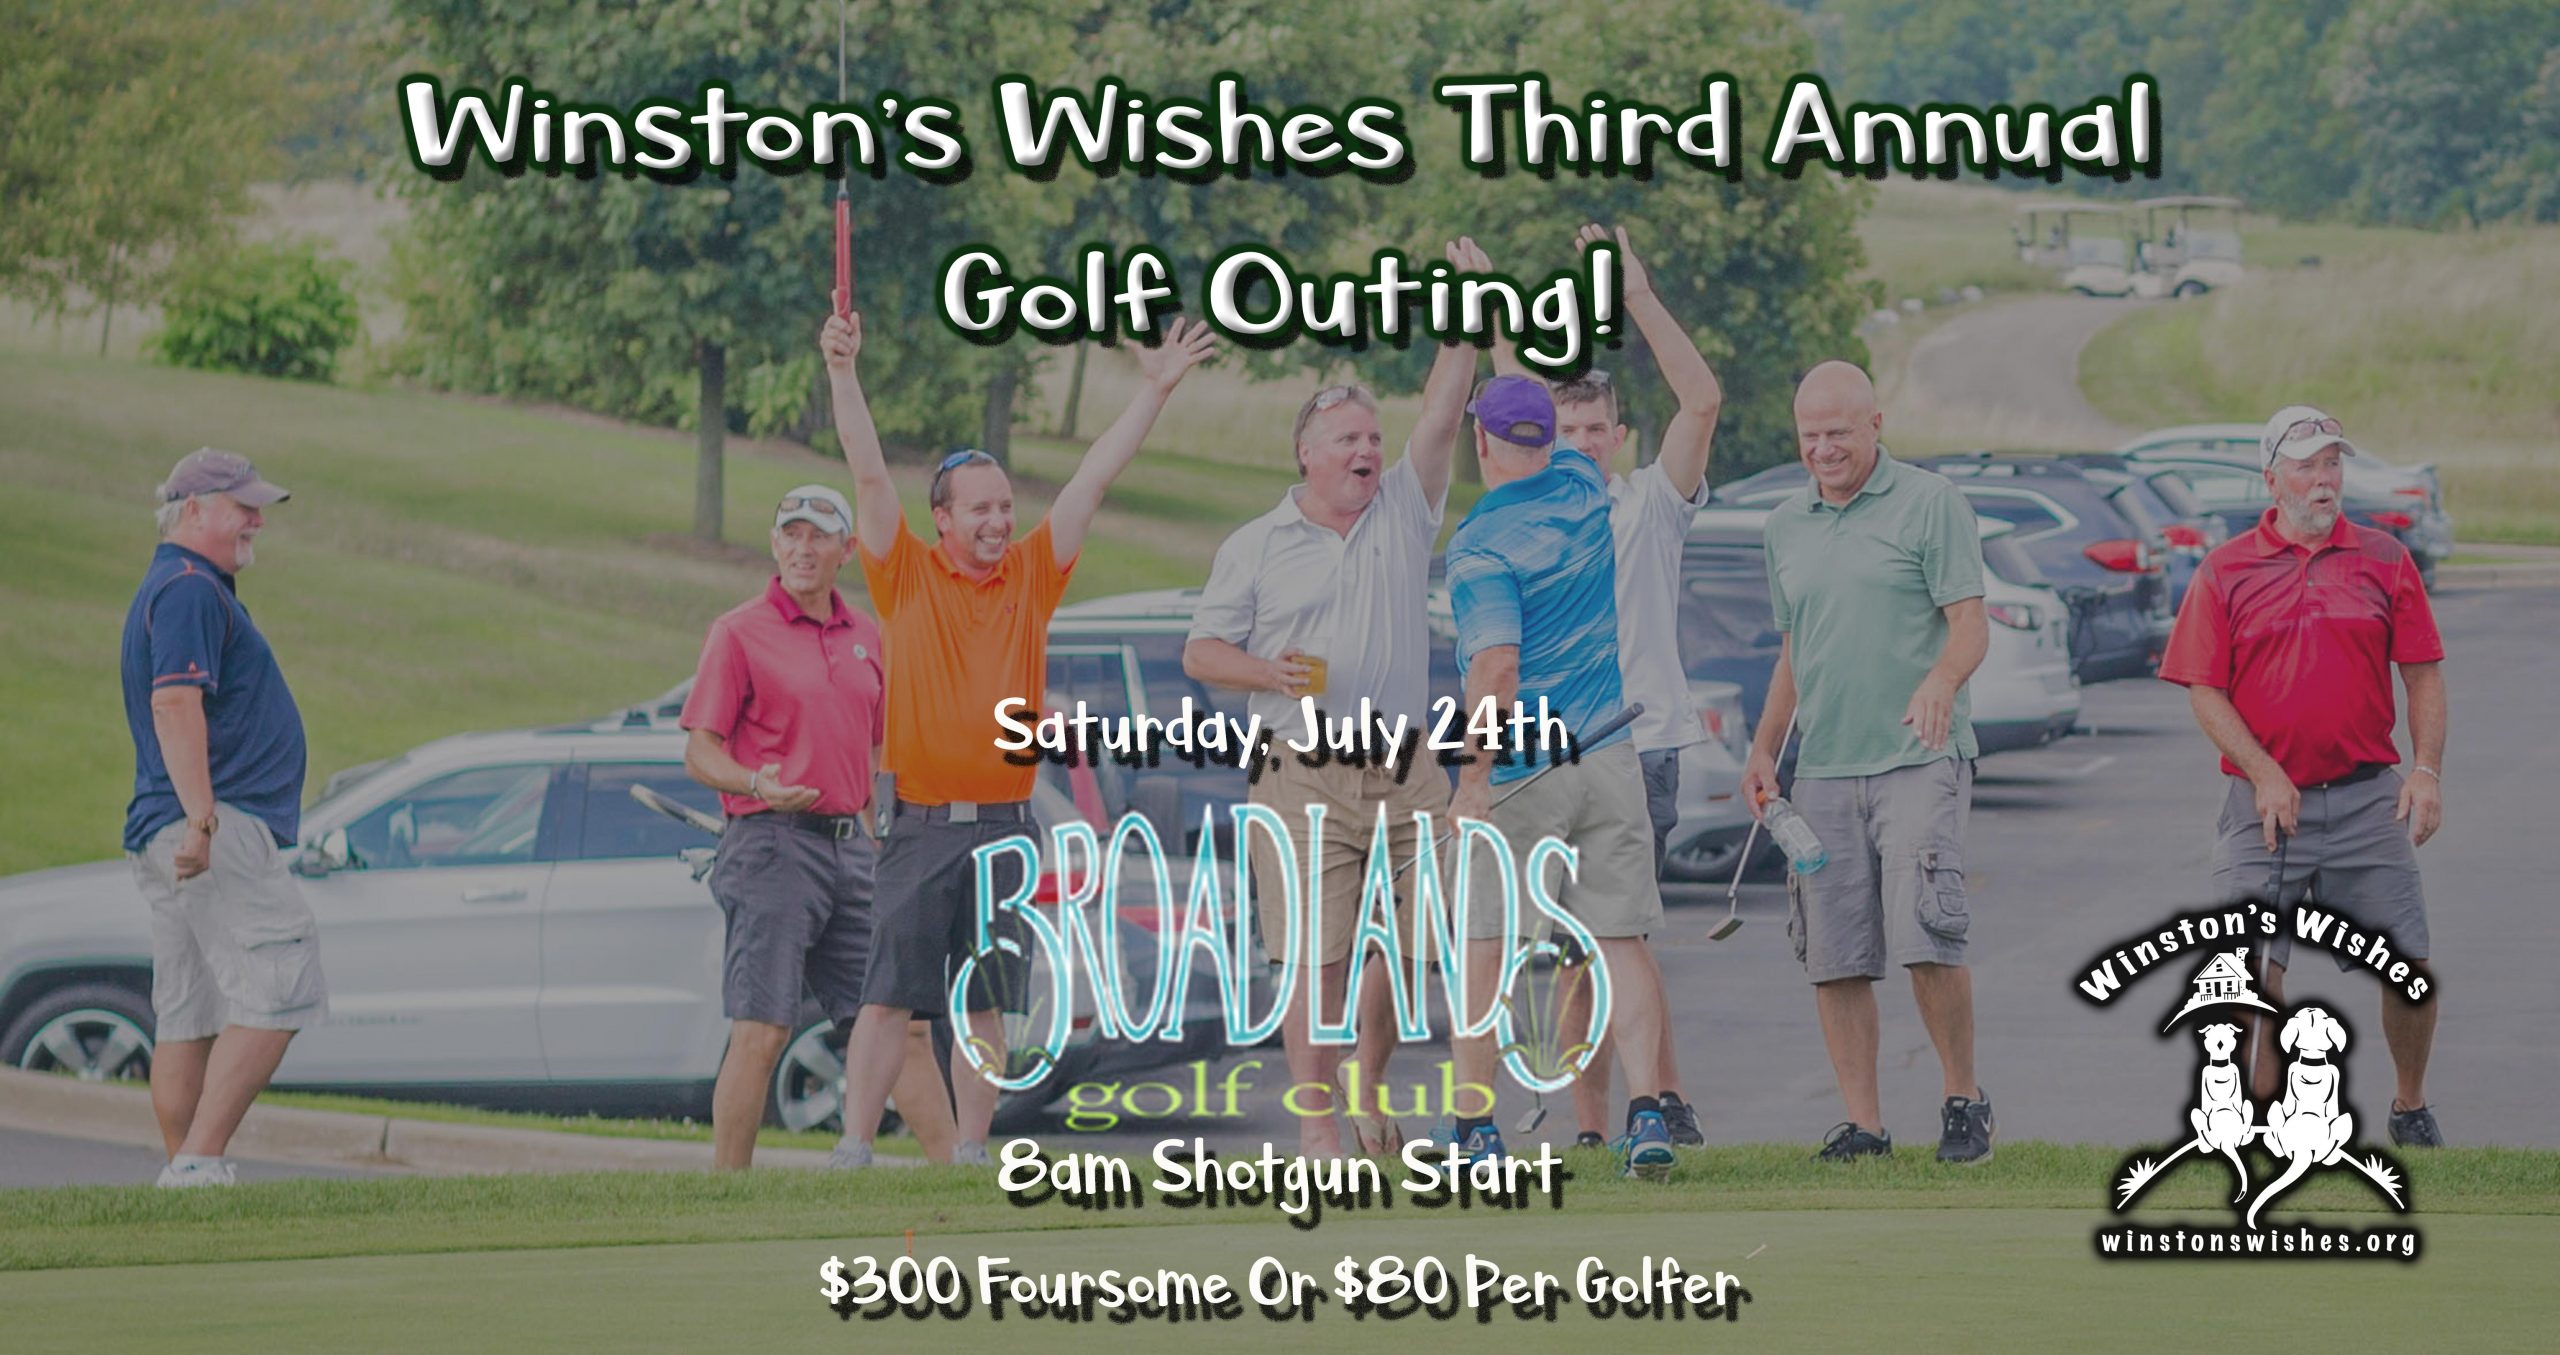 Winston's Wishes Third Annual Golf Outing